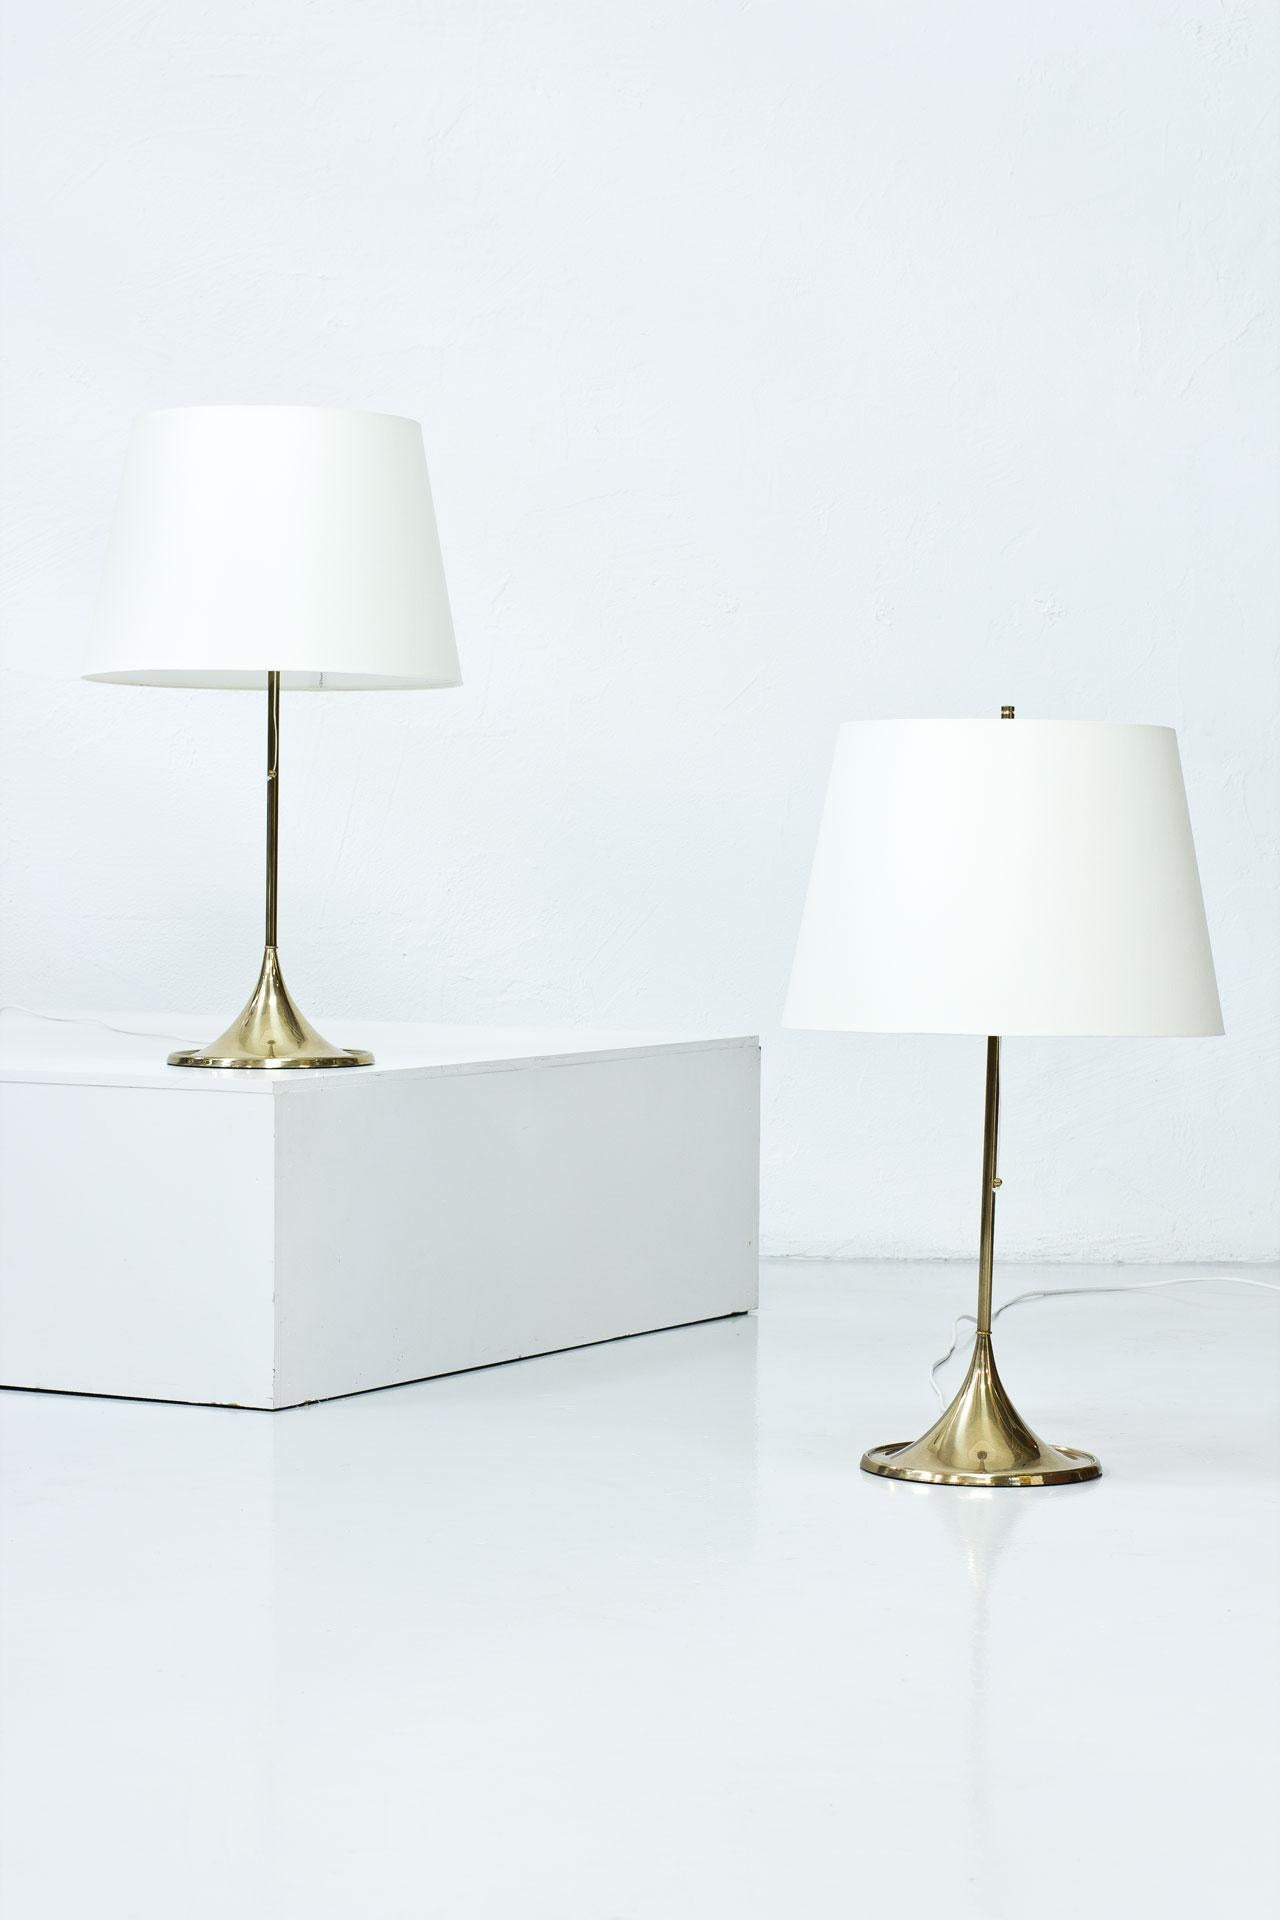 Pair of table lamps model B-024 designed by Alf Svensson and Yngvar Sandström,
(Studio S-Design) manufactured by Bergboms in Sweden during the 1960s. 
Polished brass stem, cast iron base, acrylic top diffuser and shades newly redone (handmade in